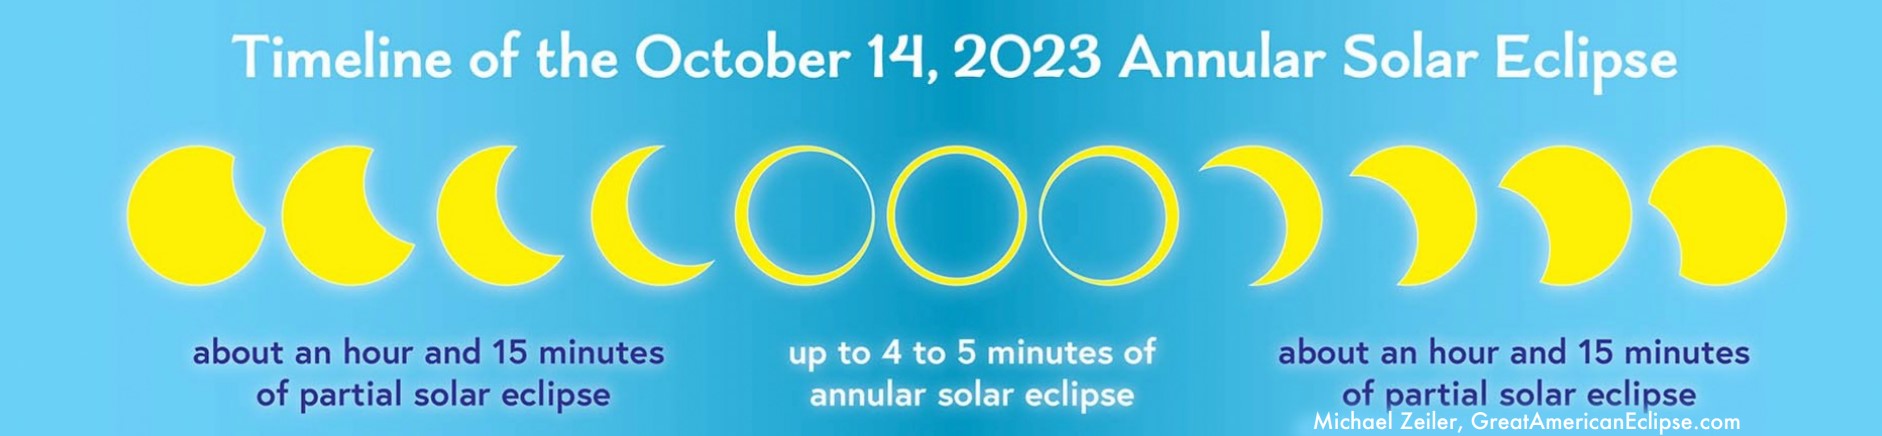 timeline of the October 14, 2023 annular solar eclipse